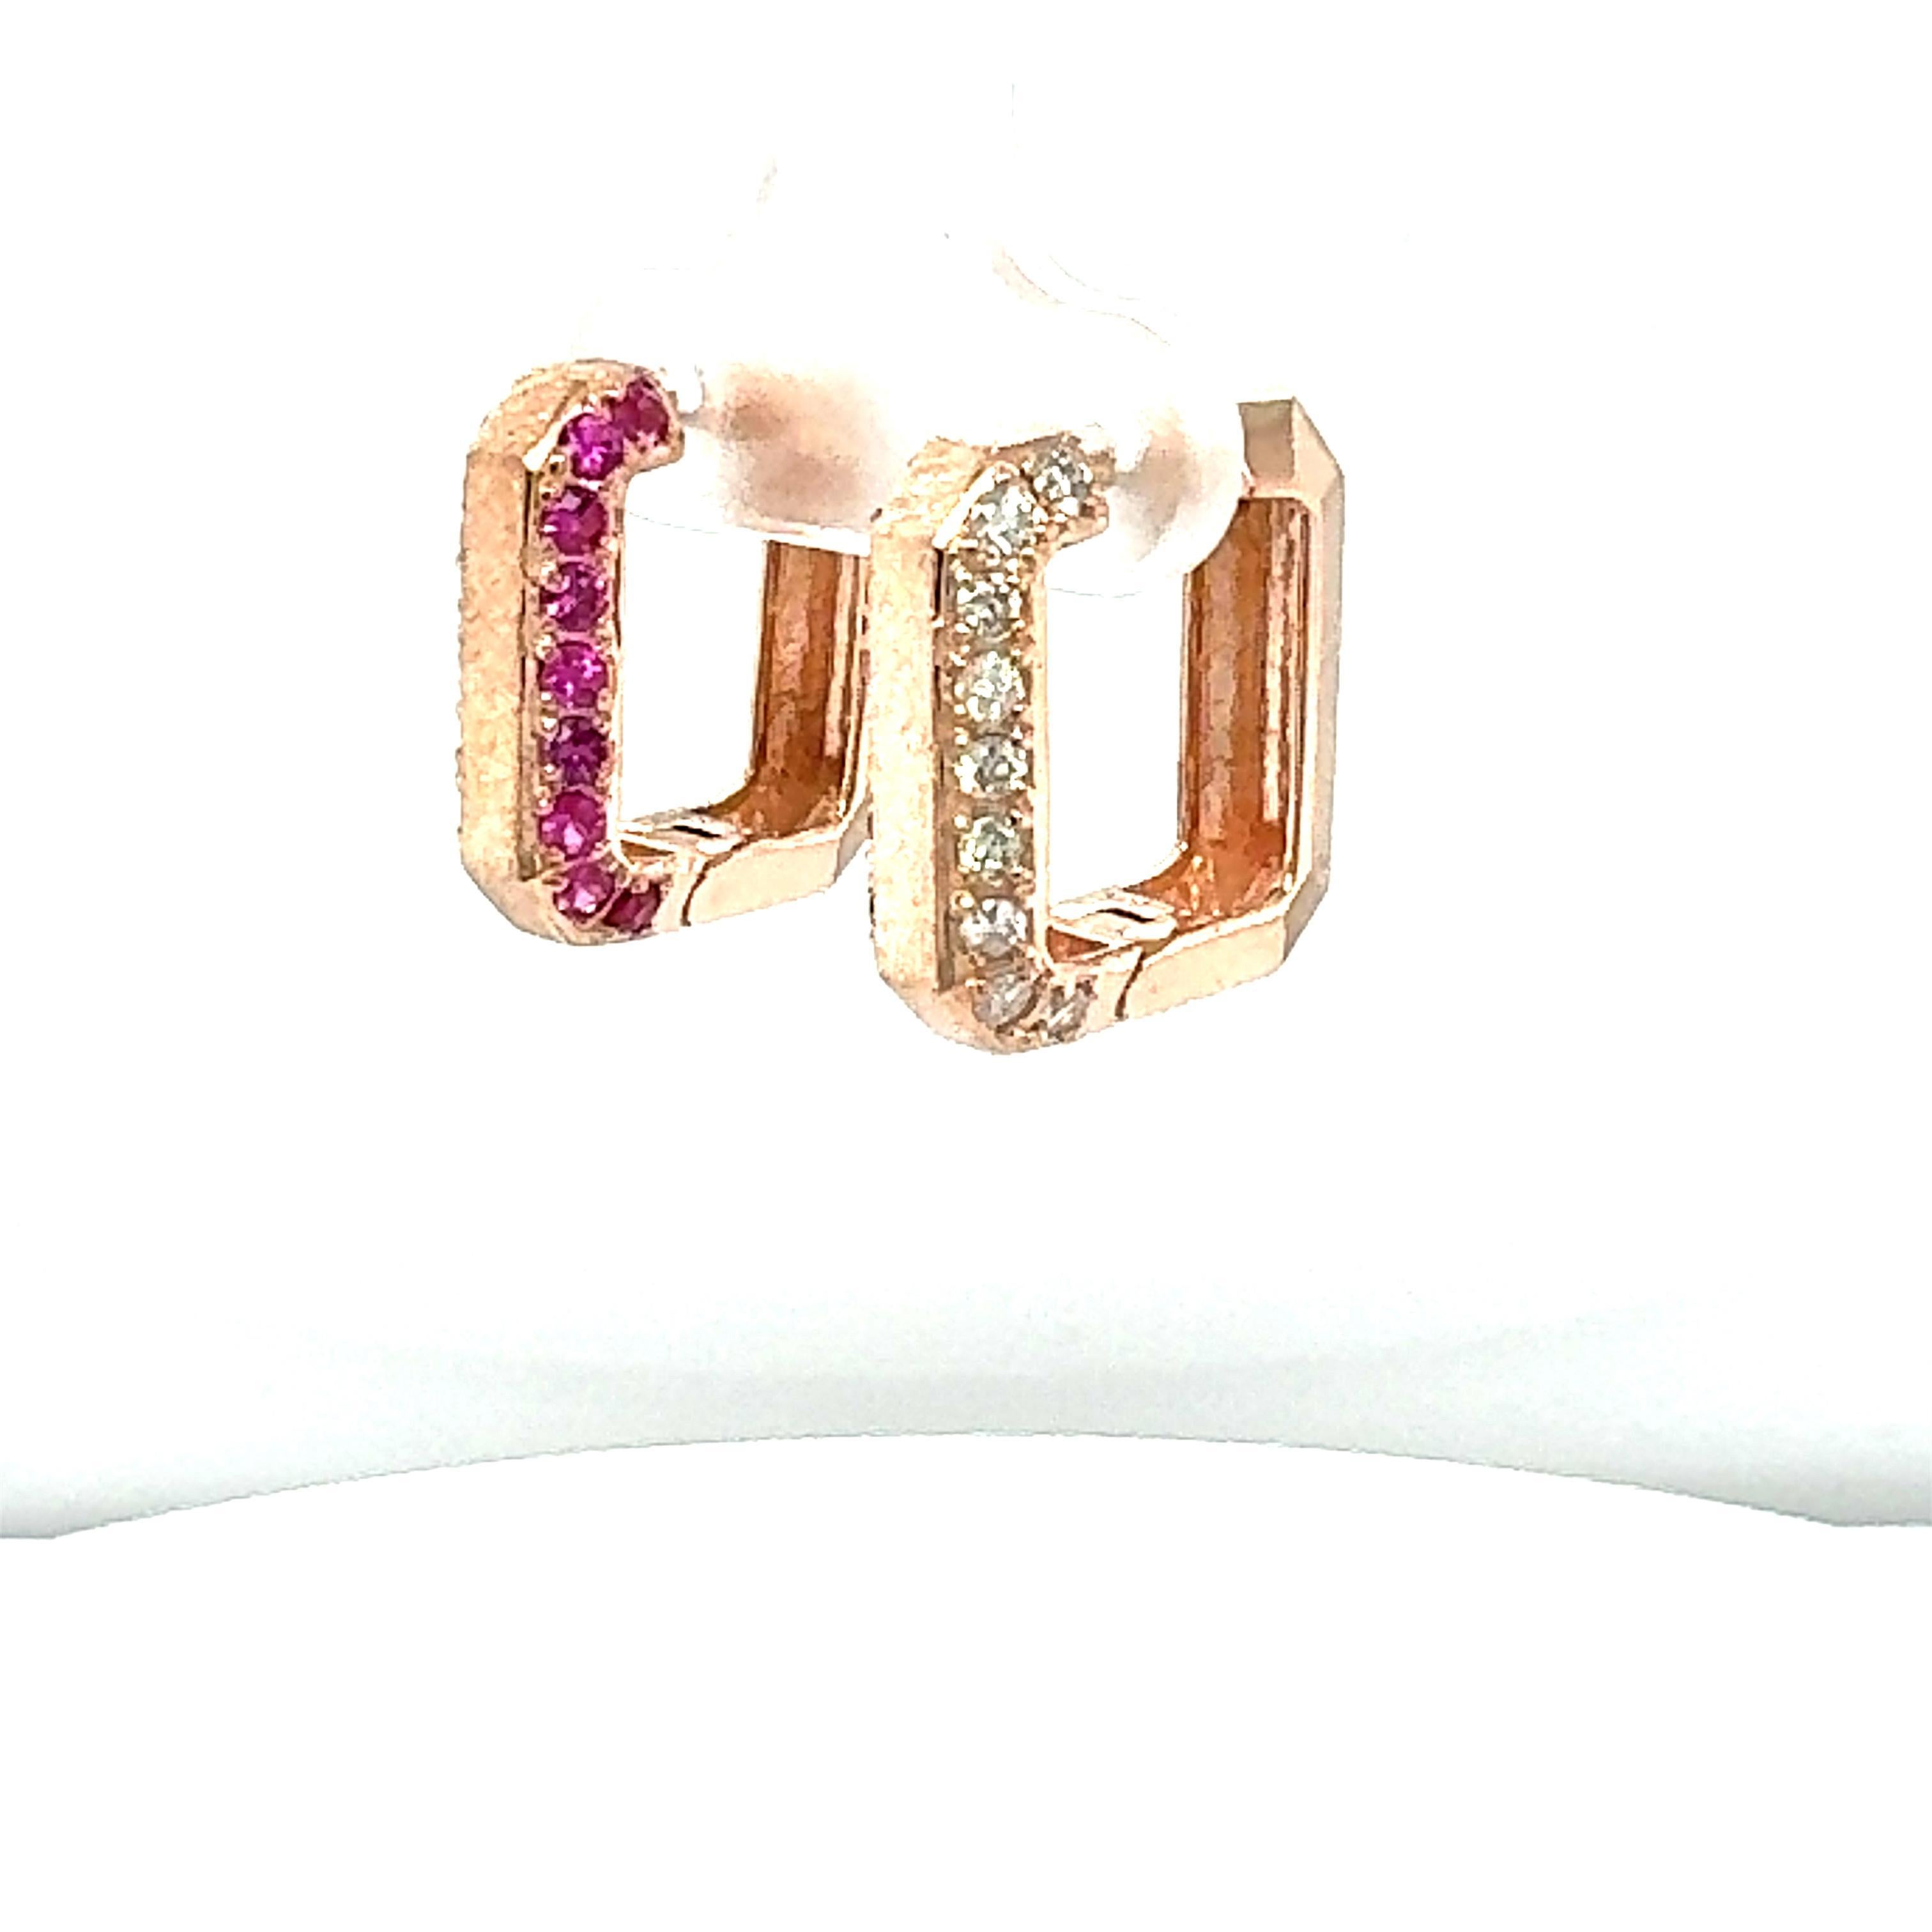 Contemporary 1.16 Carat Pink Sapphire Diamond Rose Gold Hoop Earrings For Sale